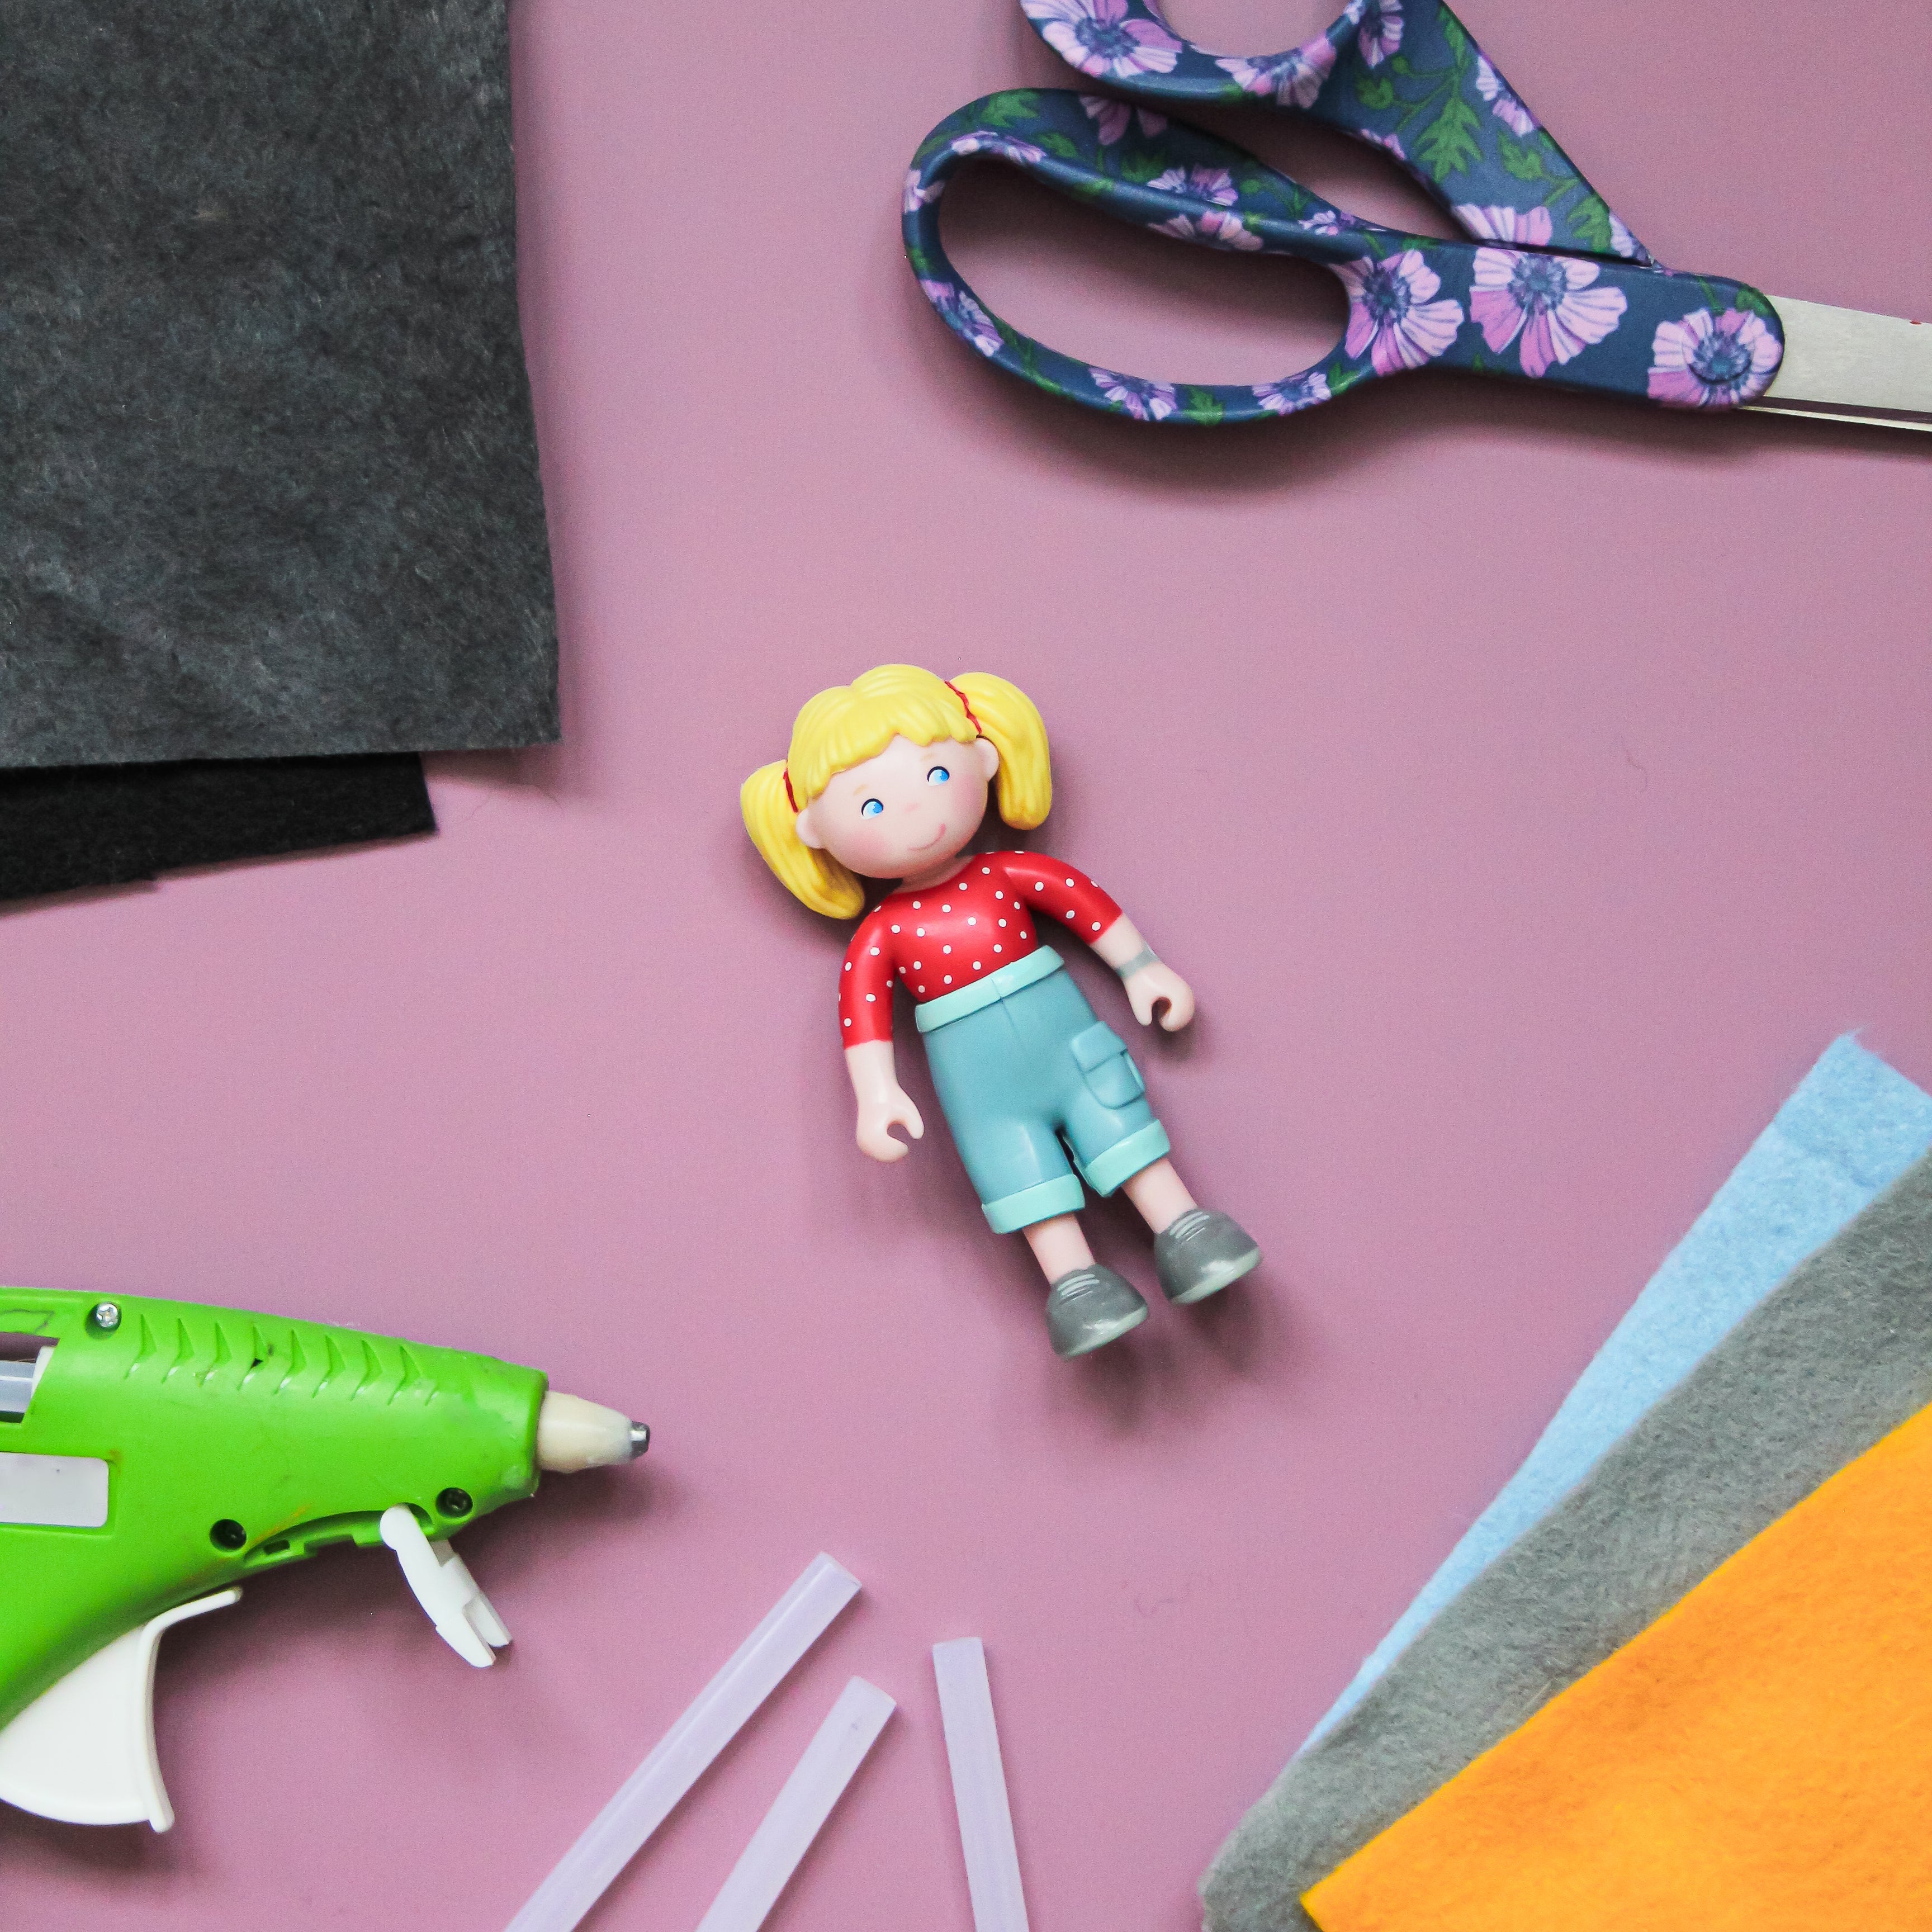 A Little Friends doll sits in the middle of felt, a glue stick, and scissors on a light mauve background.